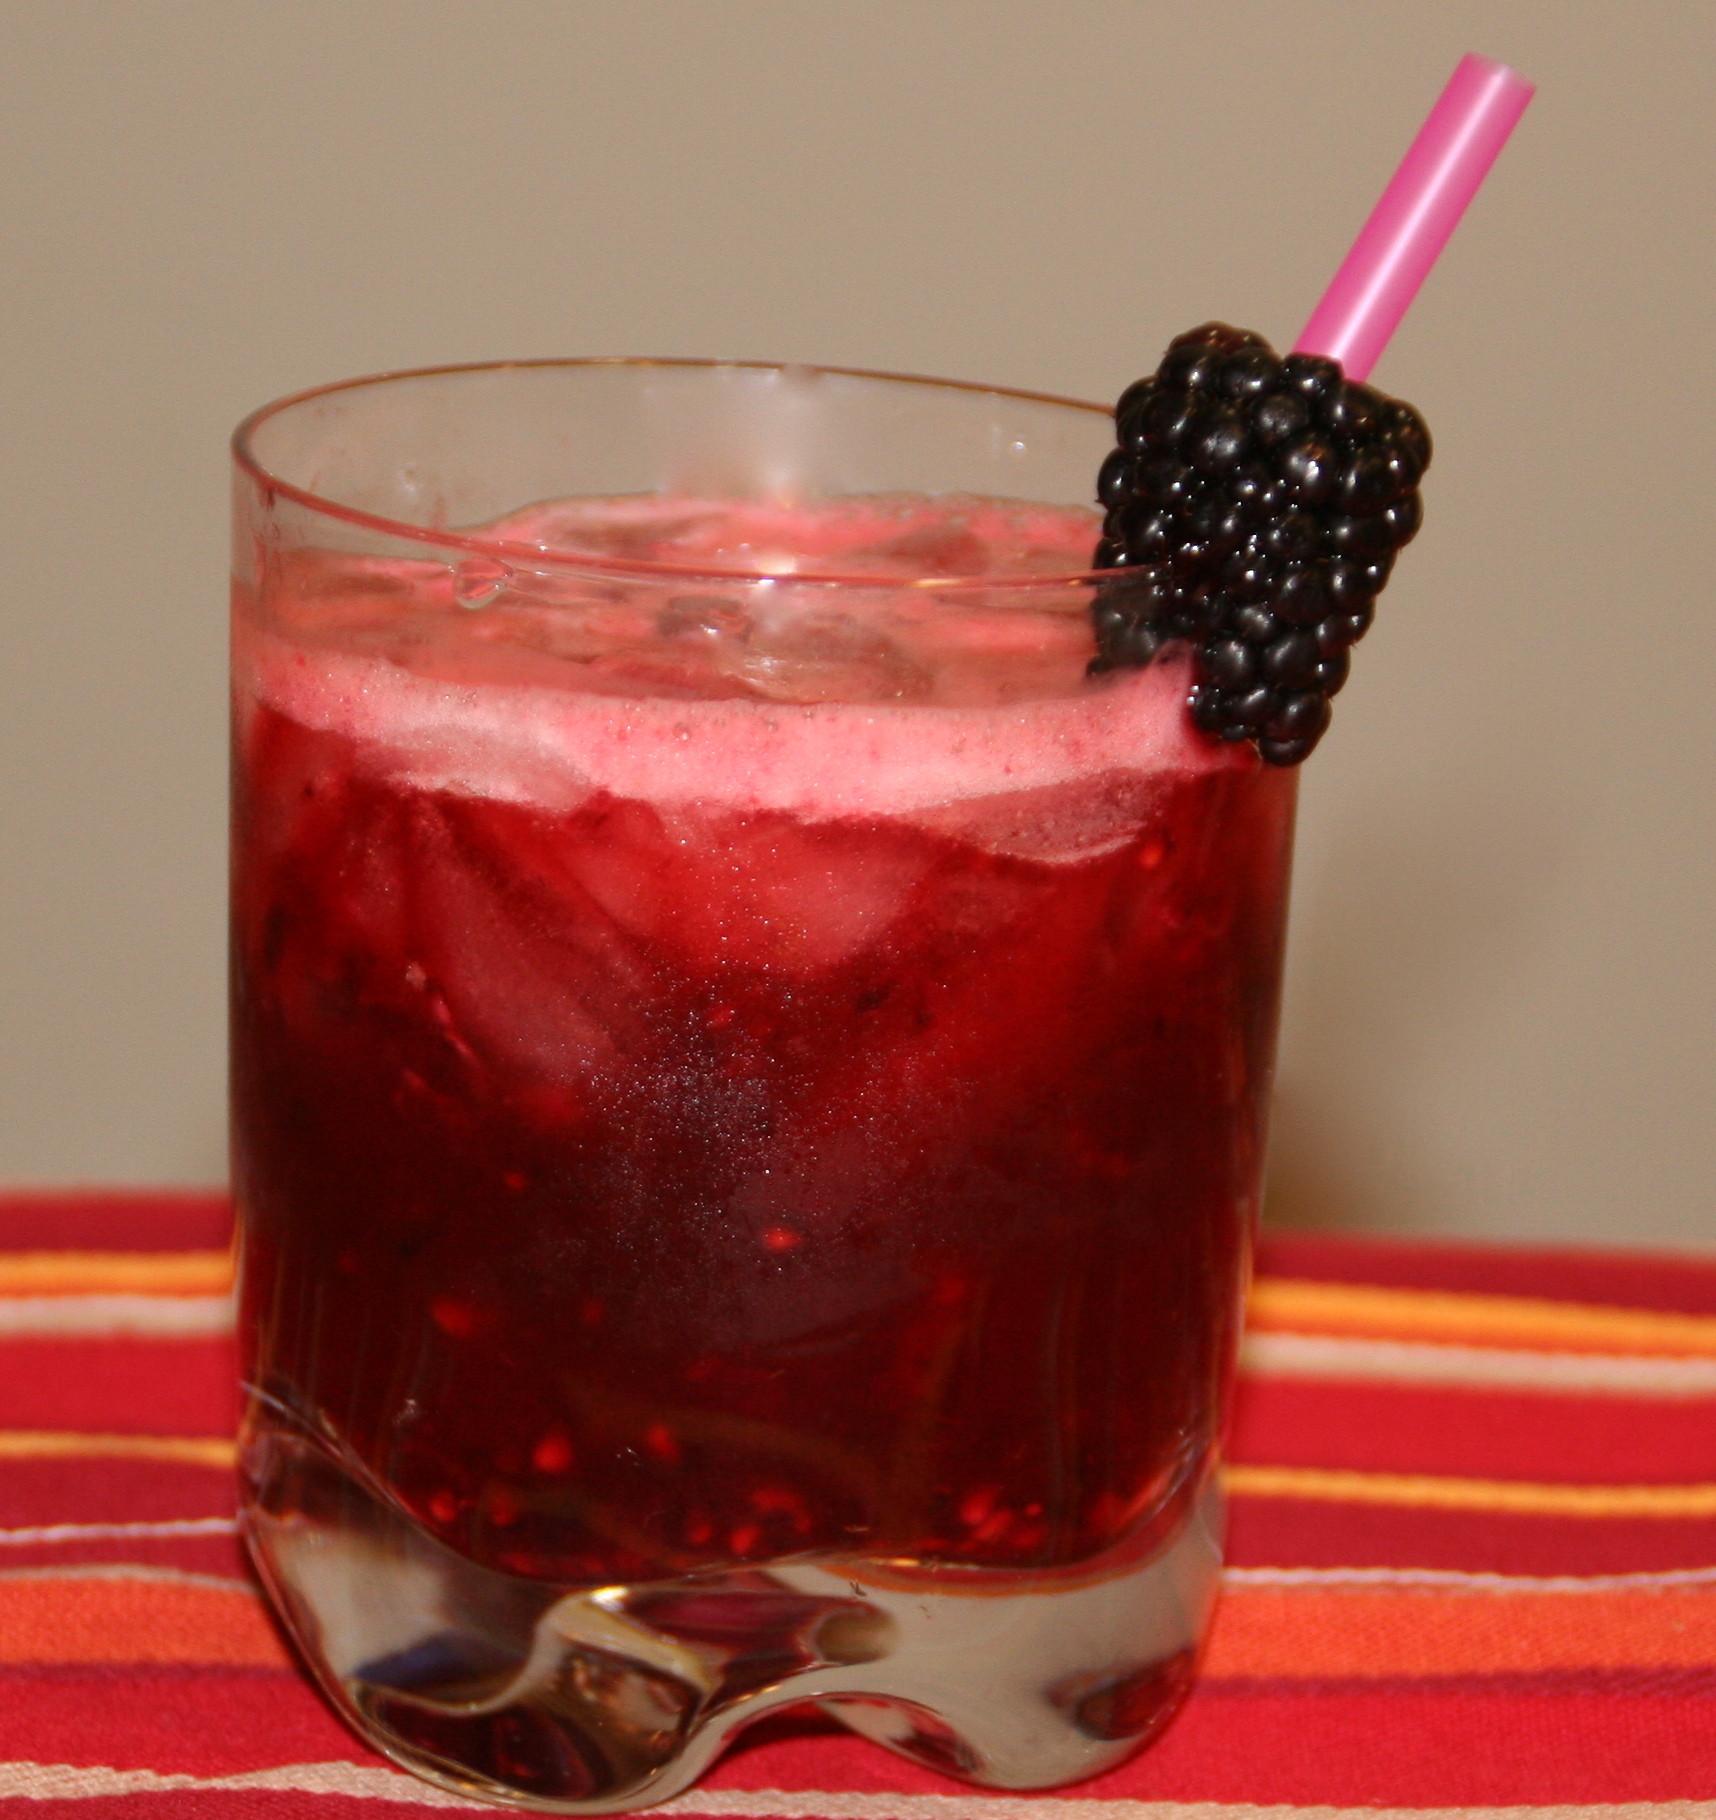 This recipe for blackberry lemonade will cool you off on a hot summer day and only takes minutes to make.